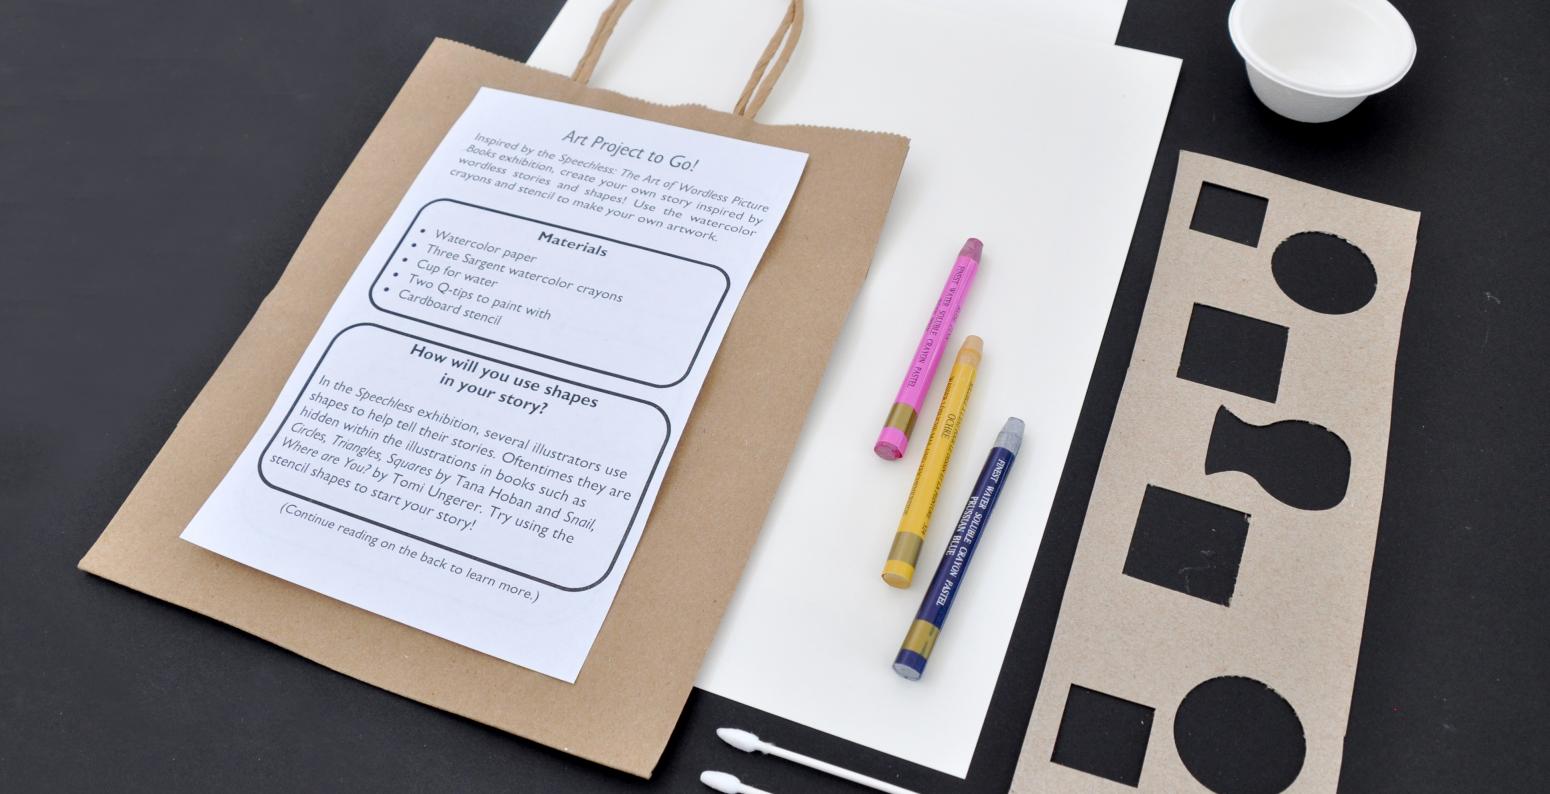 The materials within a watercolor to-go bag: a cup, two cotton swabs, a stencil, three watercolor crayons, two watercolor papers, a paper bag, and a flyer. 